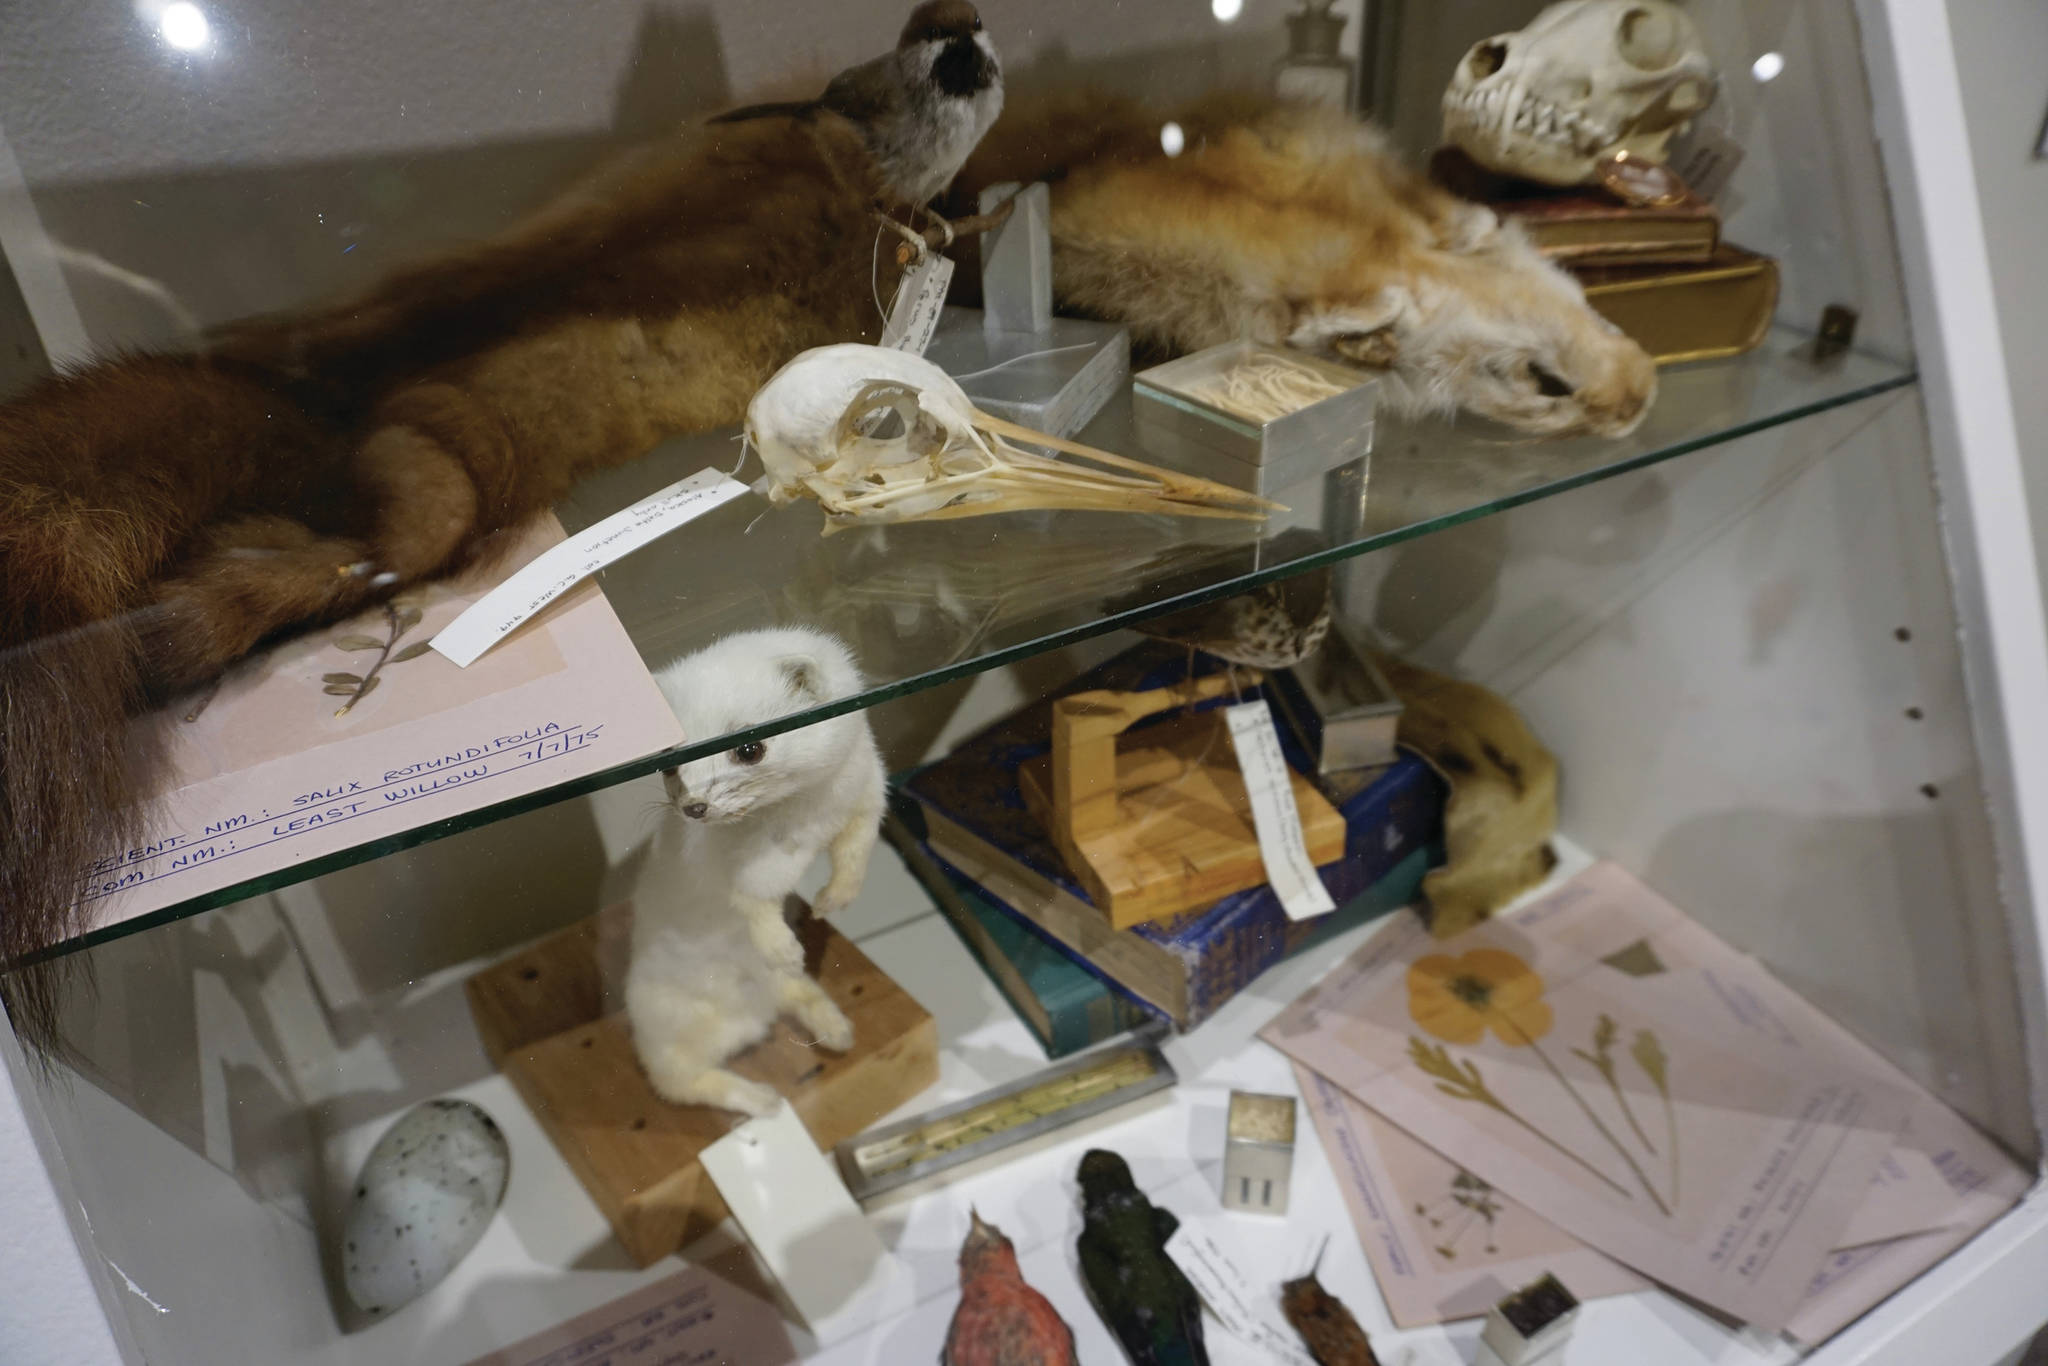 One of the exhibits in “Entangled: Exploring Natural History Collections from Kachemak Bay,” as seen on July 13, 2020, at the Pratt Museum in Homer, Alaska. (Photo by Michael Armstrong/Homer News)